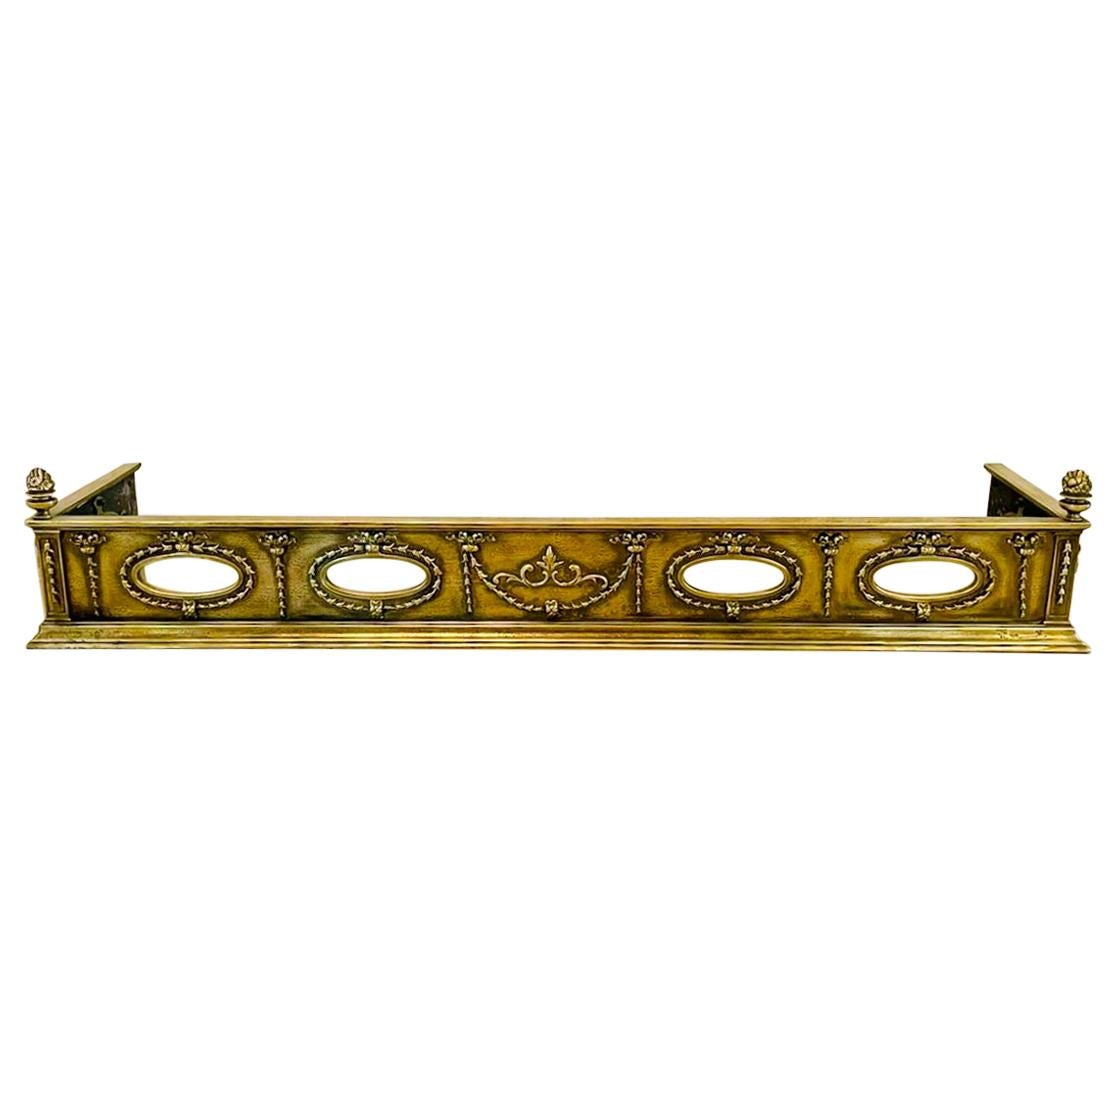 Quality Antique Victorian Ornate Brass Fender For Sale